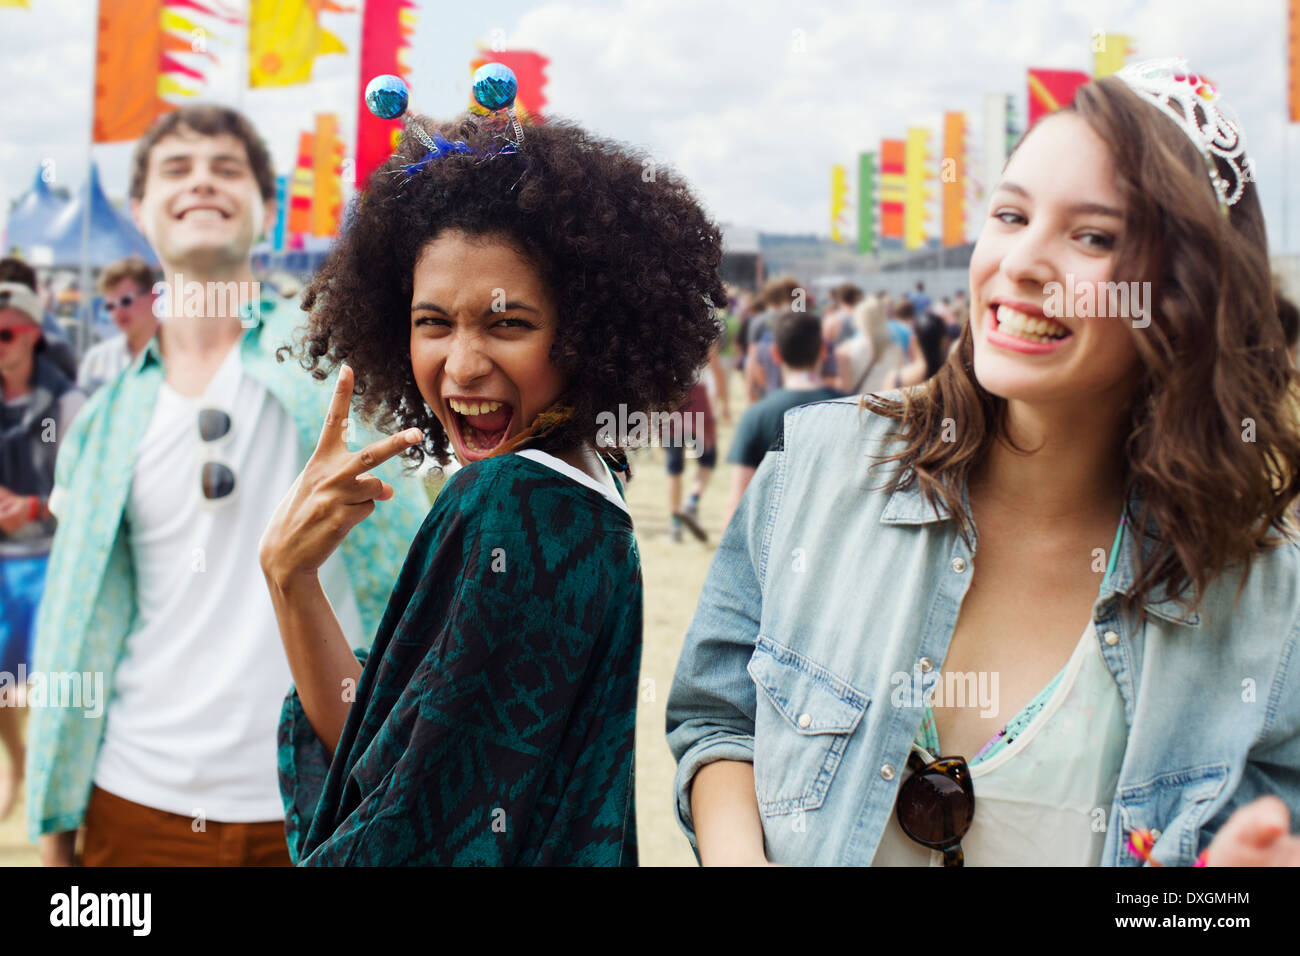 Enthusiastic friends at music festival Stock Photo